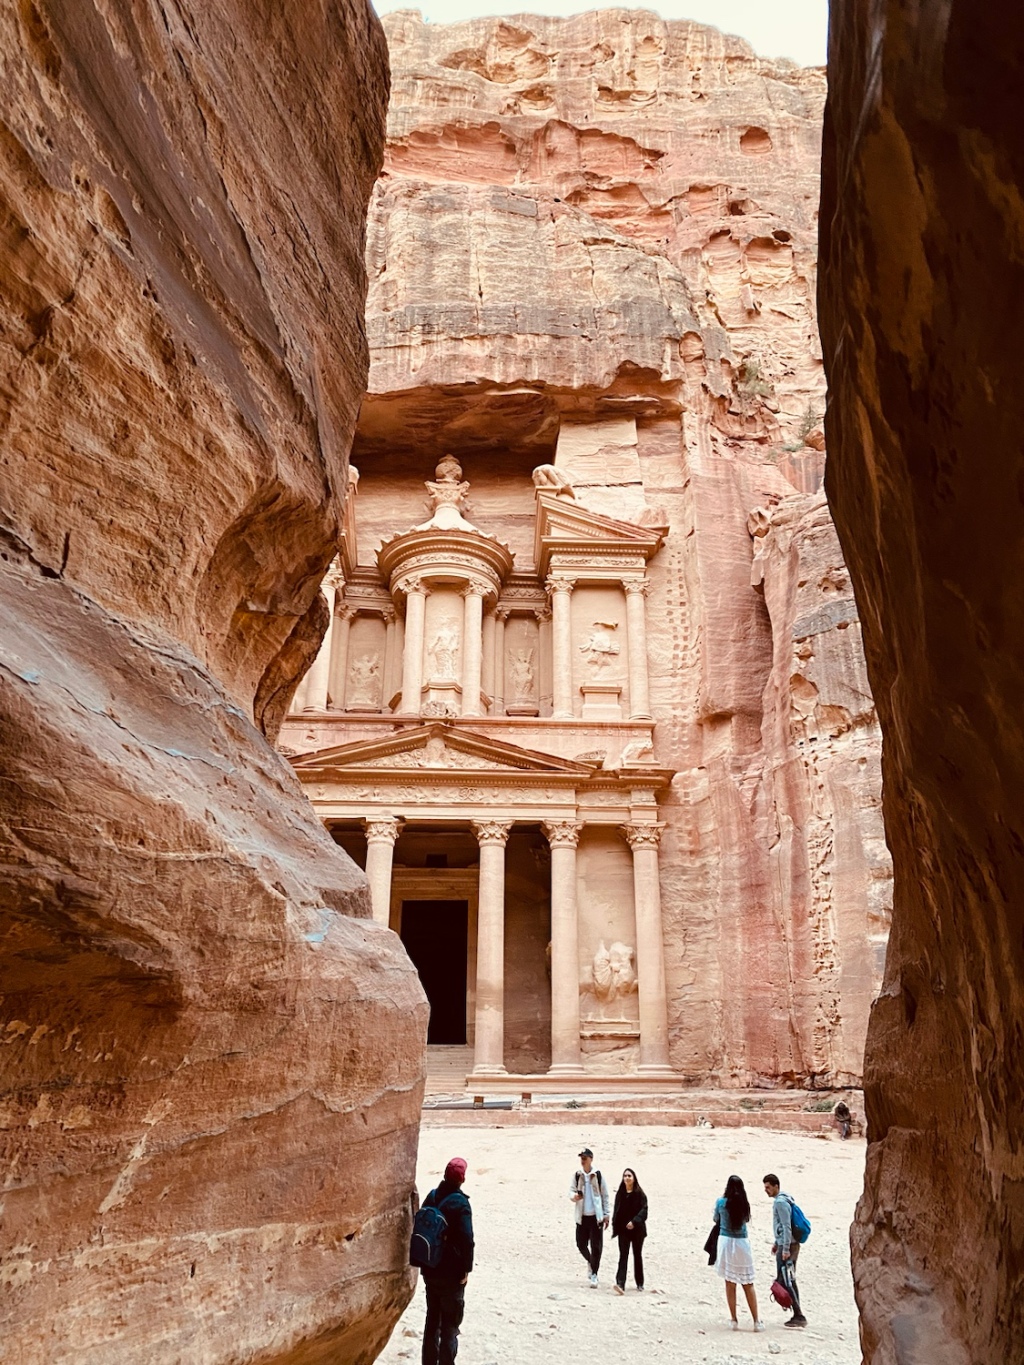 TOP 11 THINGS TO DO IN JORDAN THAT ARE A MUST DO IN ANY TRAVEL BUCKET LIST